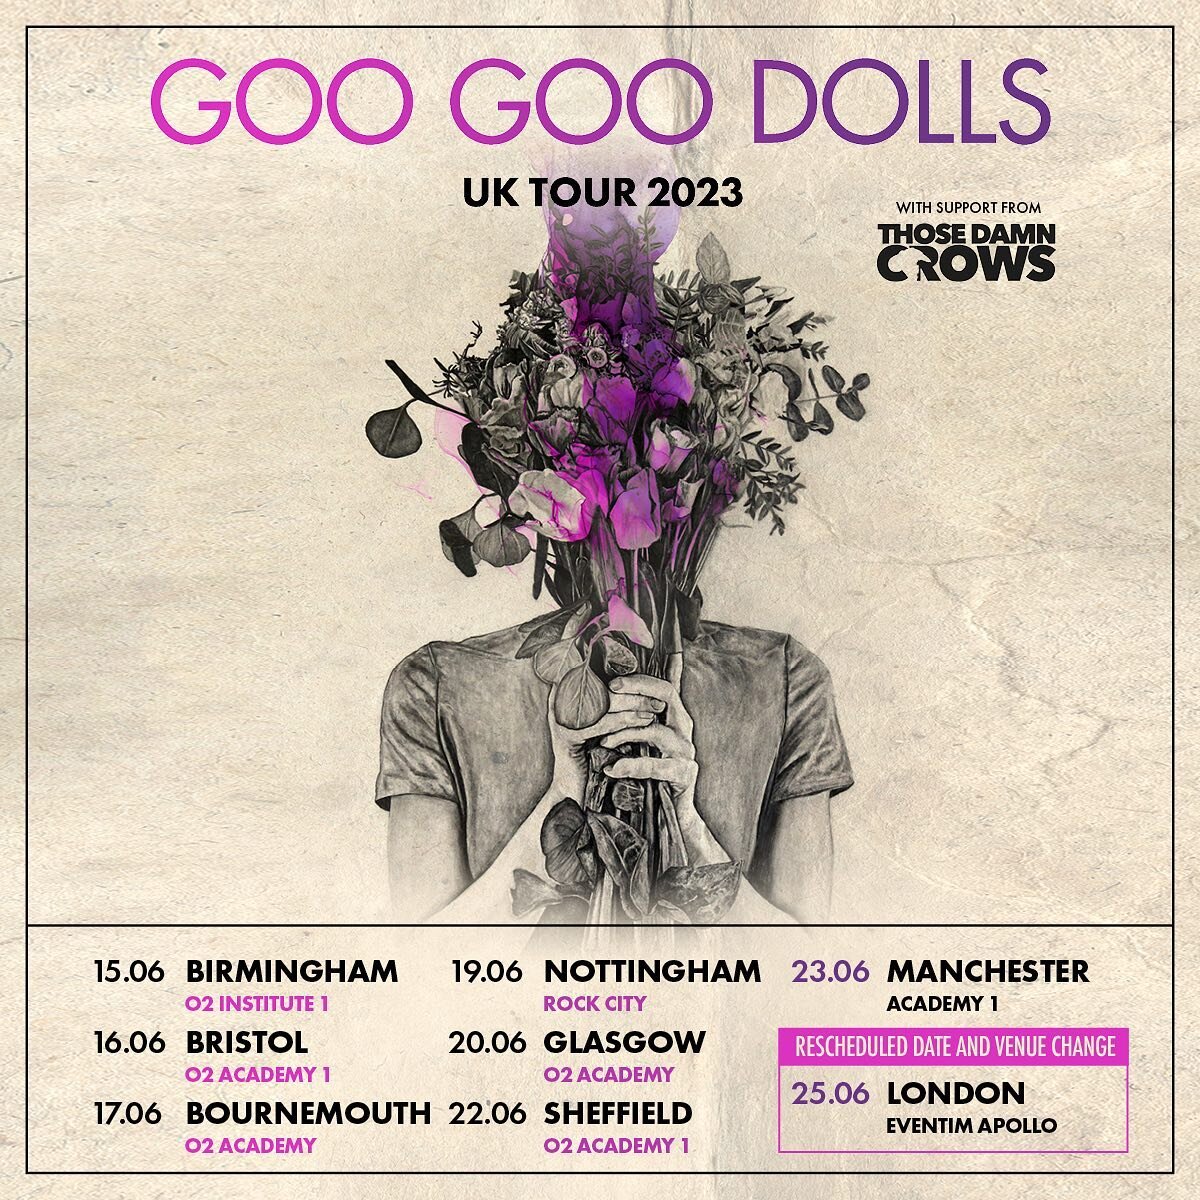 Won&rsquo;t be long now folks until our next U.K. Tour, which will starting in a months time across the country with the legendary @googoodollsofficial !

Please note the change of venue and date for the London show to the iconic Hammersmith Apollo, 